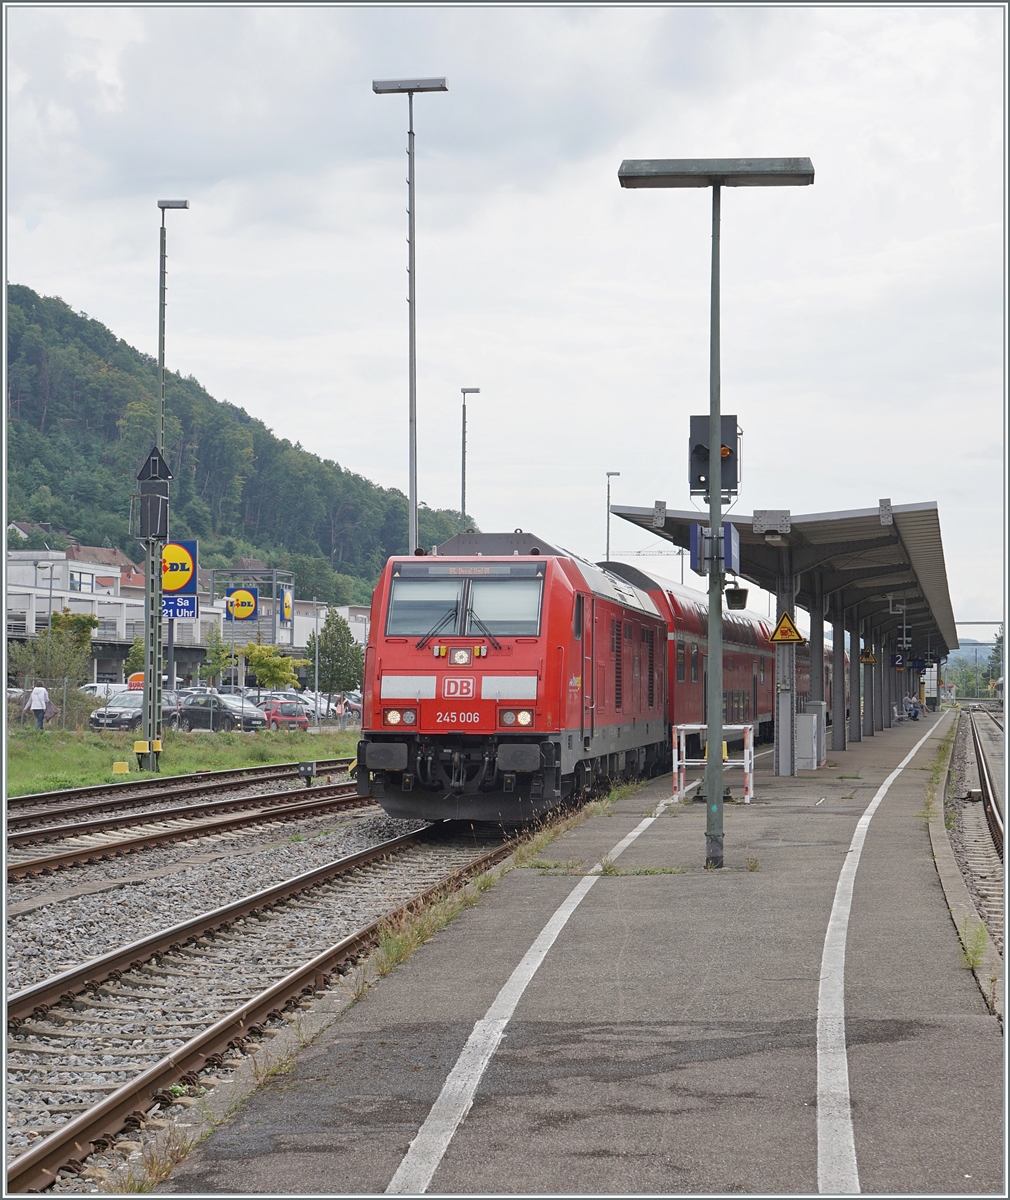 The DB 245 006 with a IRE from Friederichshafen to Basel Bad Bf in Waldshut. 

06.09.2022